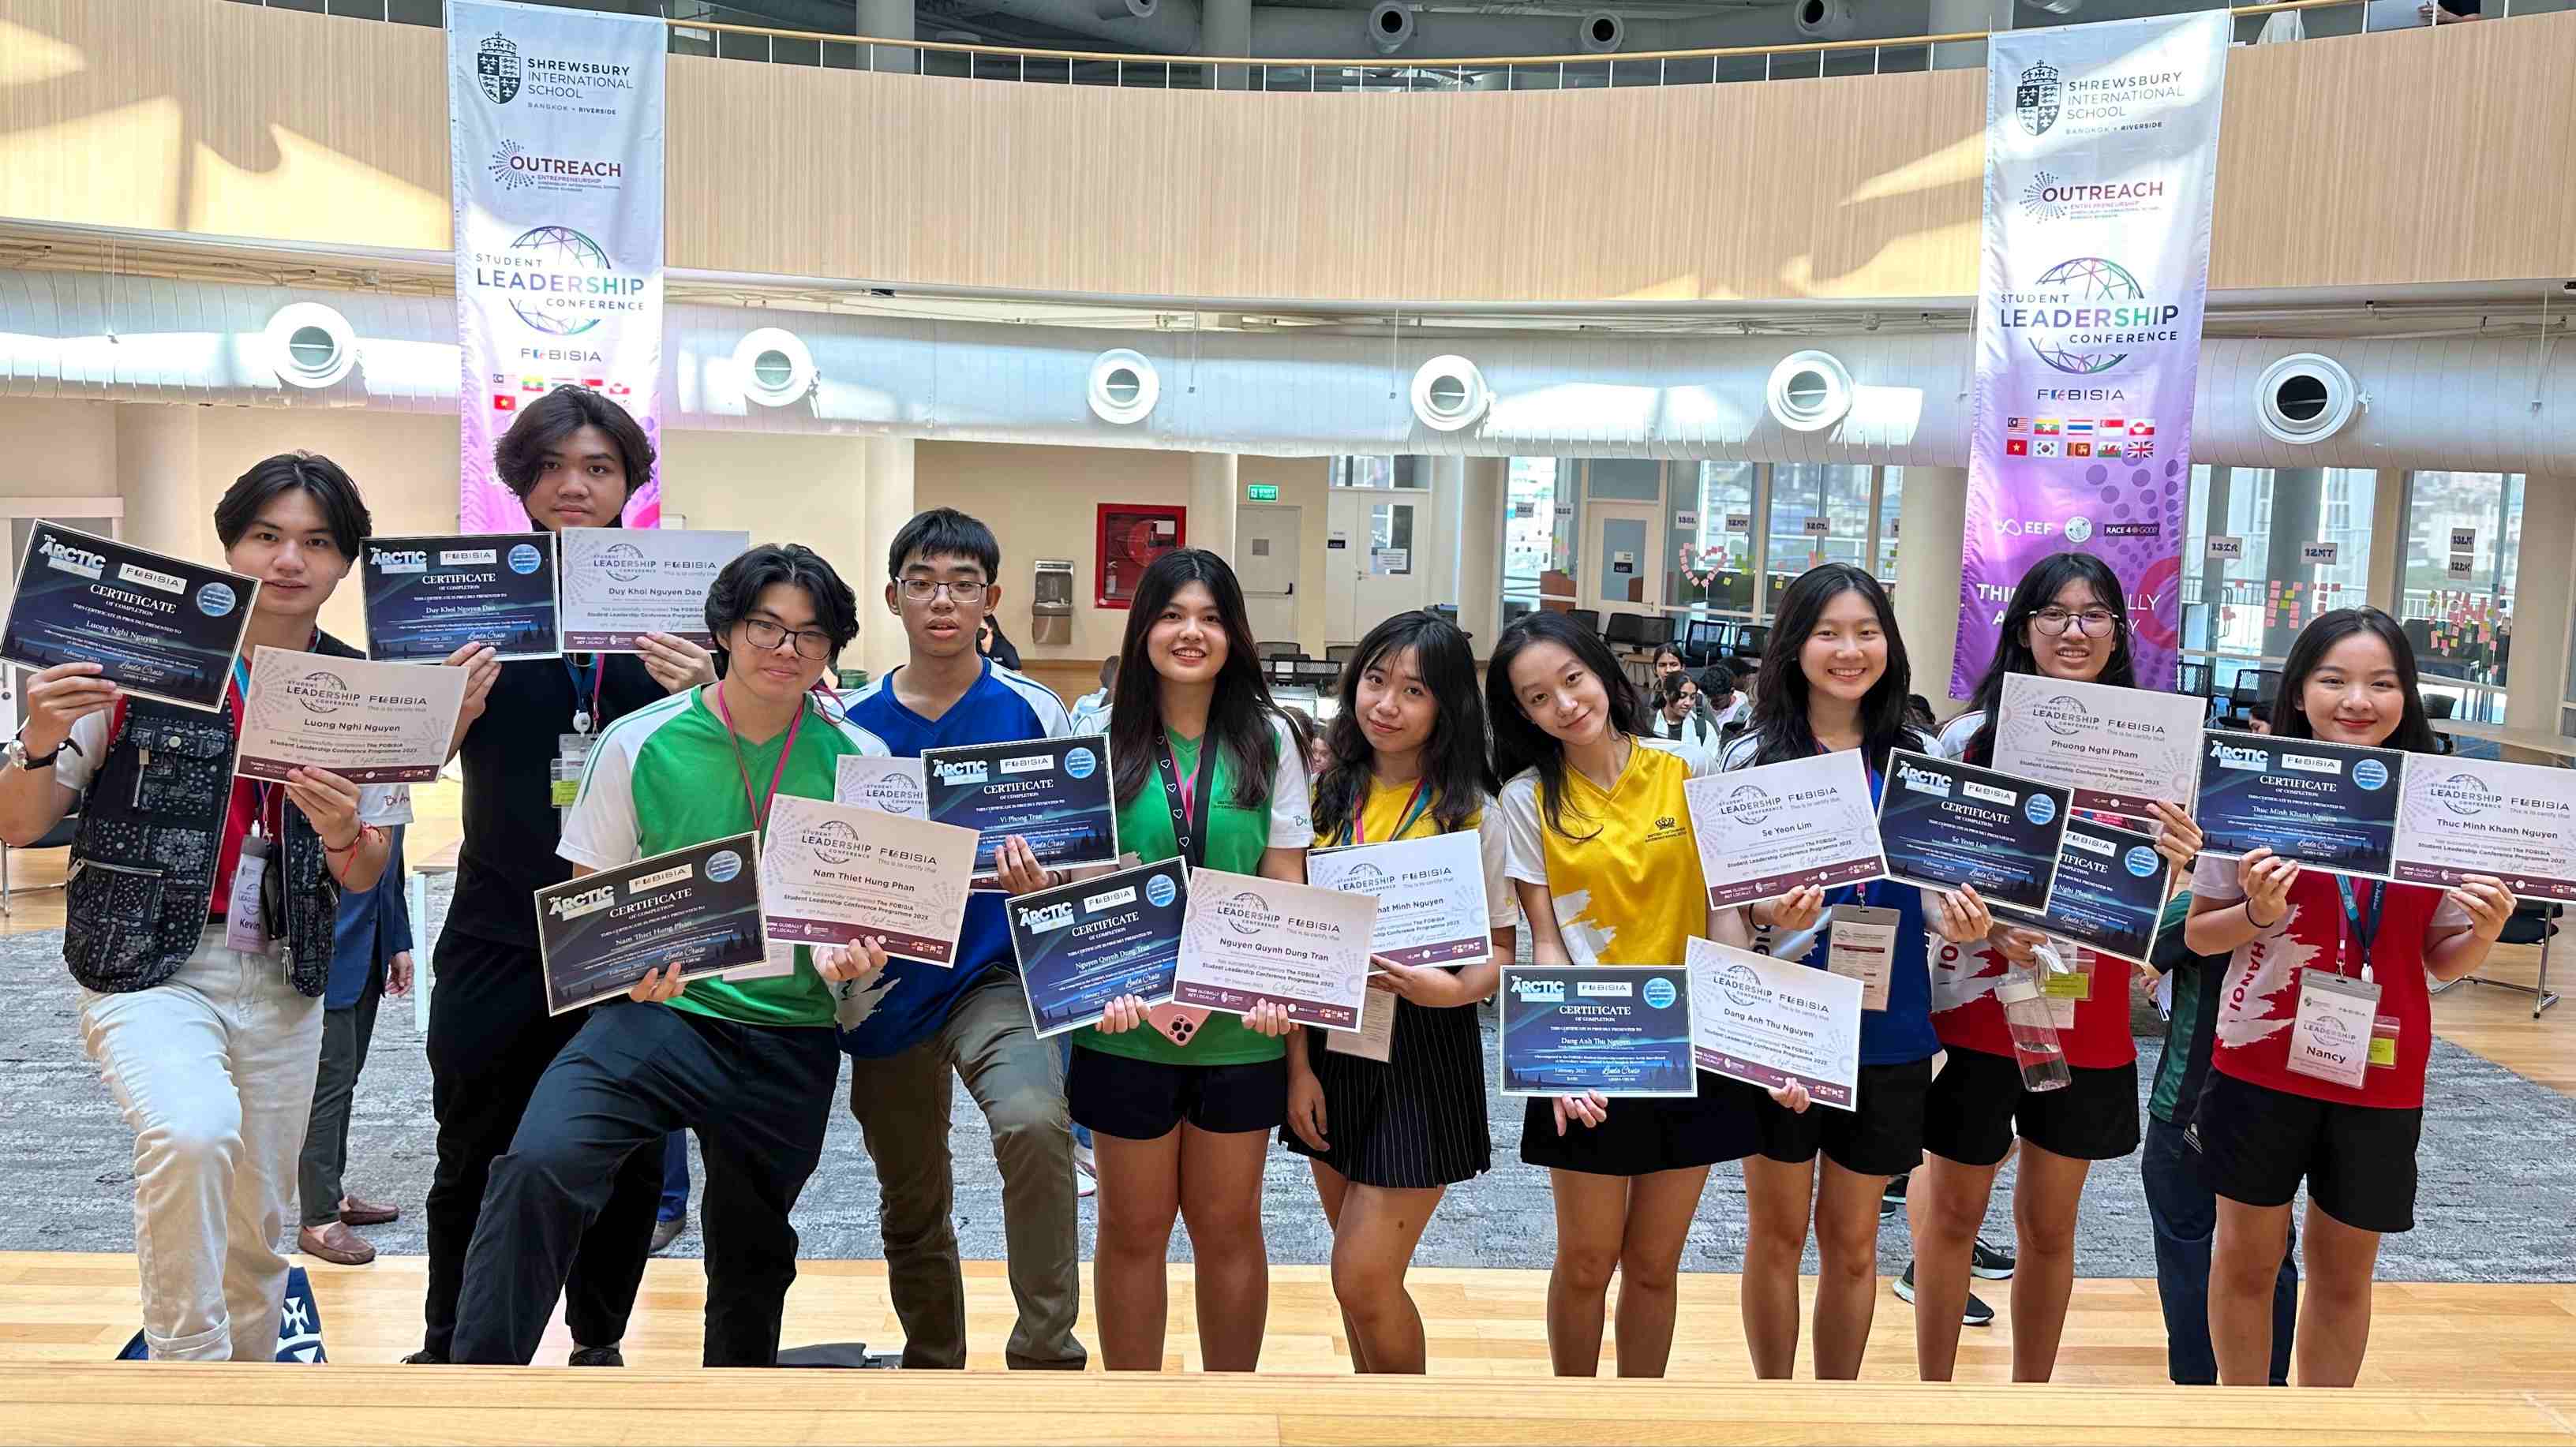 Our students business plan "Wild Wallet" won at the FOBISIA Student Leadership Conference - Our students business plan wild wallet won at the fobisia student leadership conference 2023